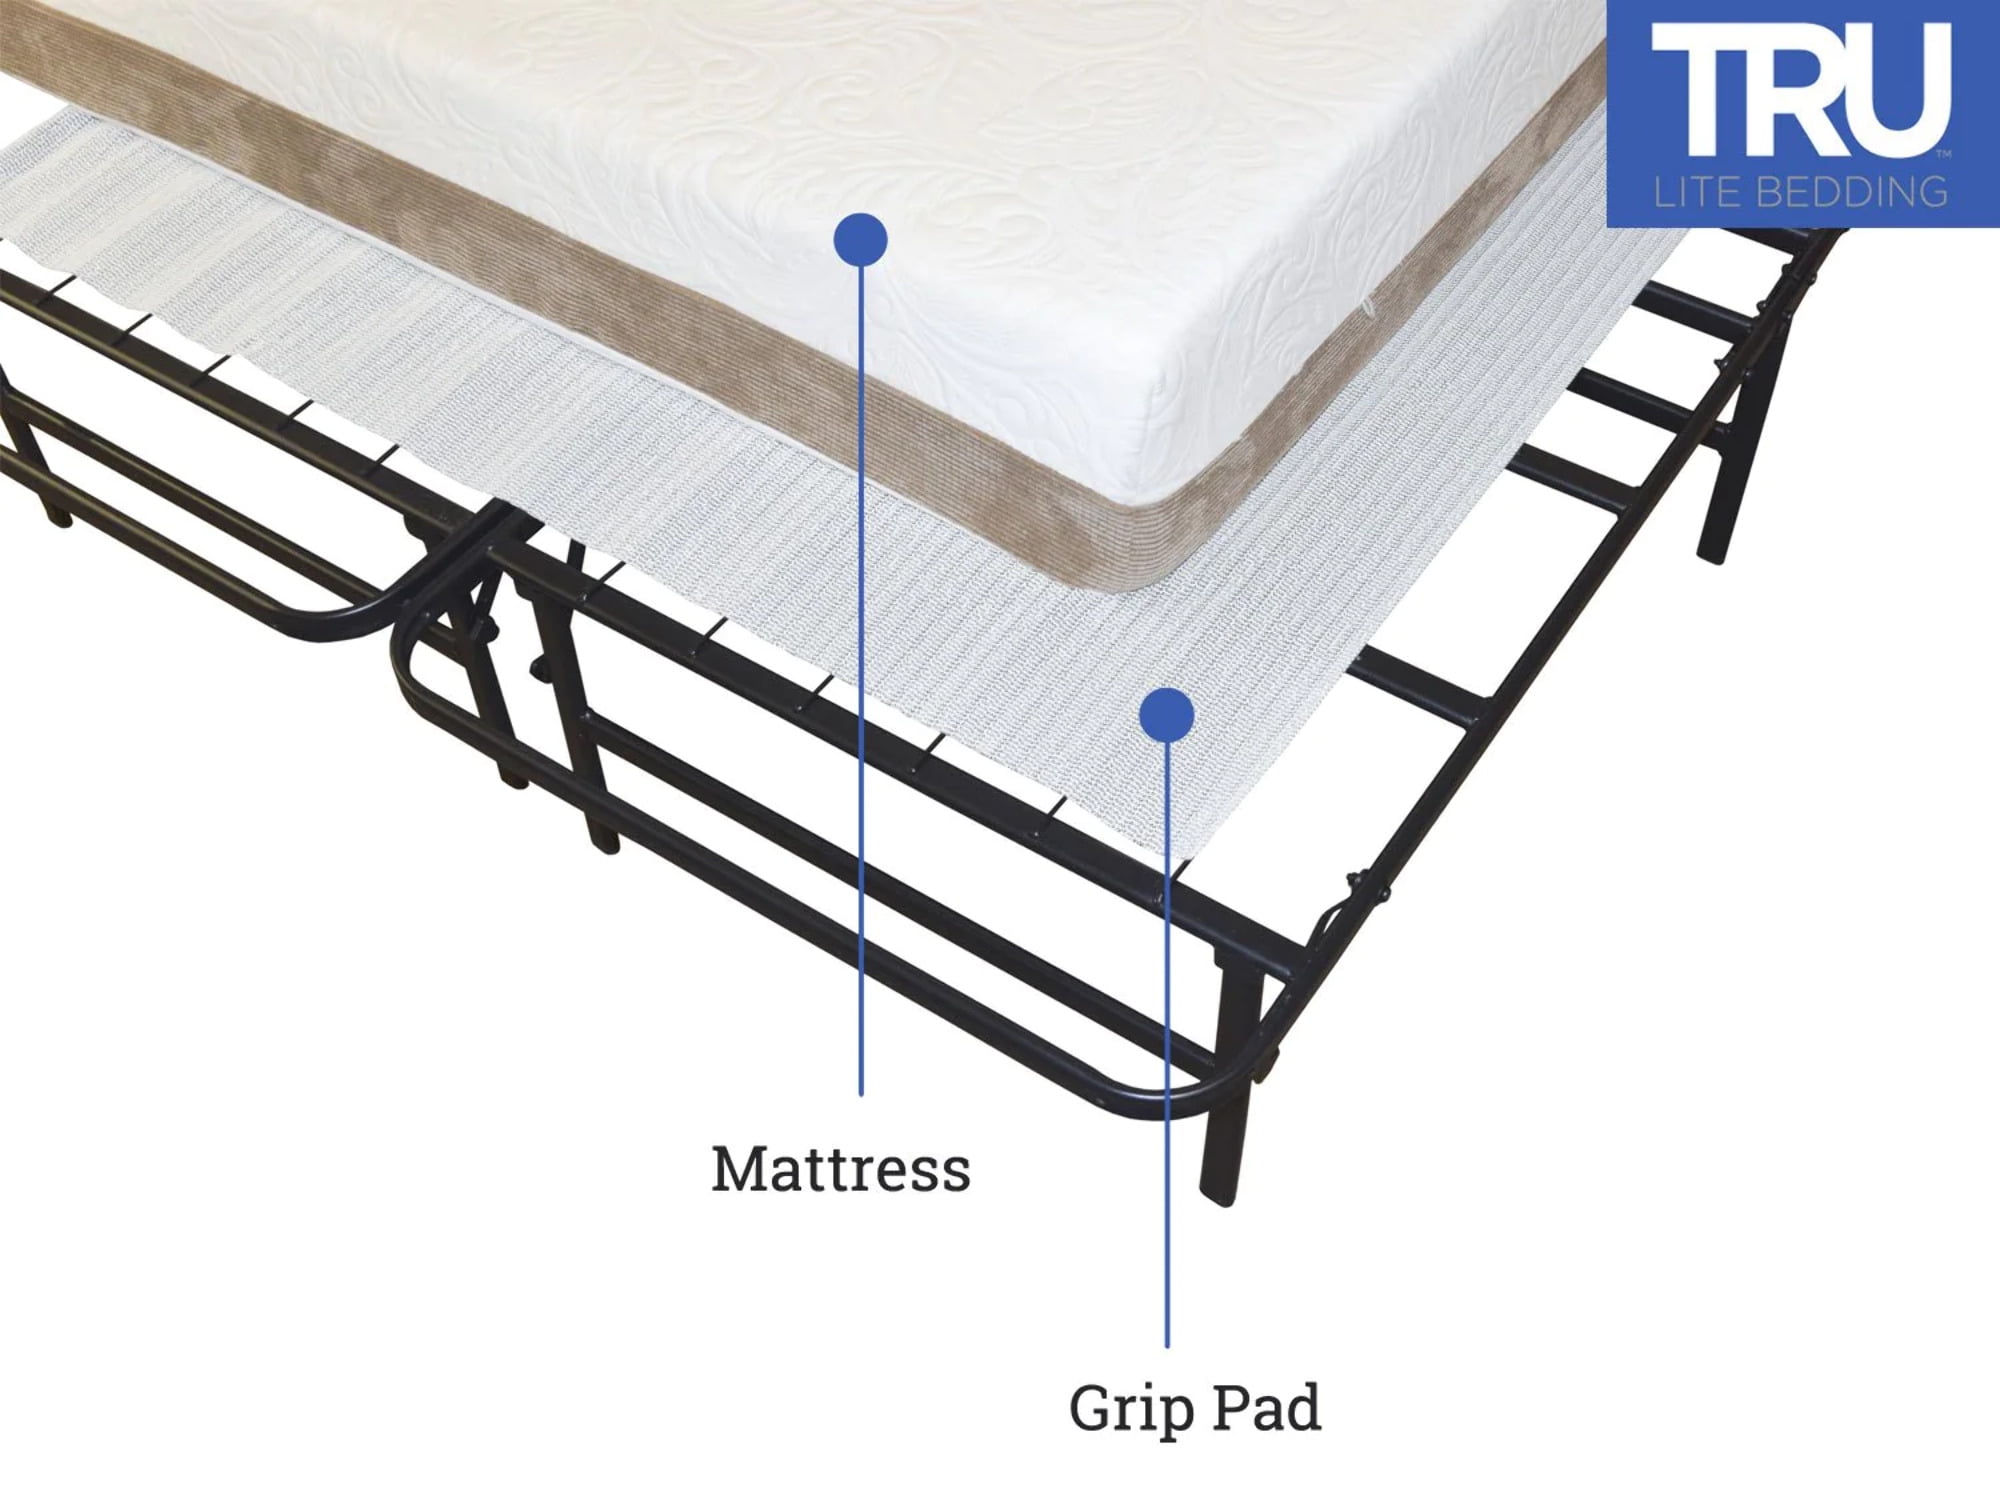 Anti Slip Grip Pad for Spring and Memory Foam Queen Size Mattress, Keeps  Mattress in Place for a Great Night's Sleep - Queen Size 59 x 79 in (4.9 x